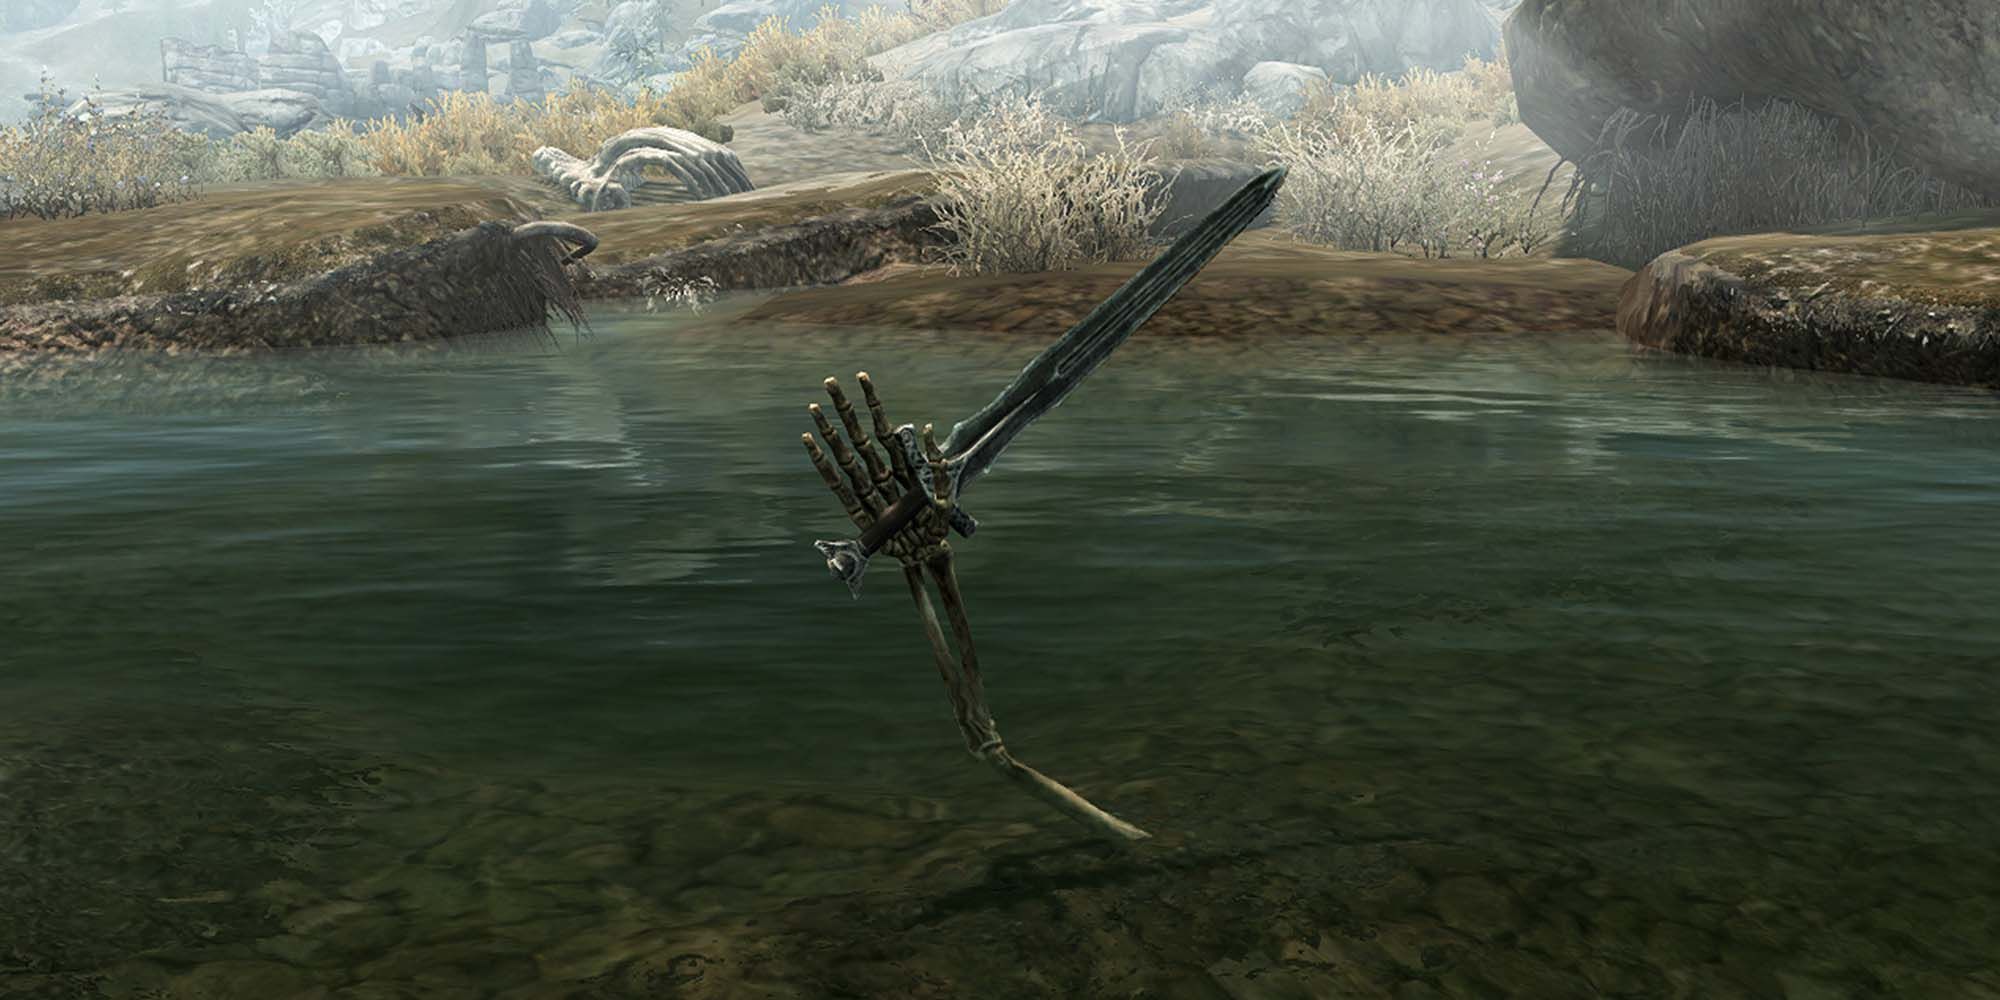 Skyrim Actually Has Two Excaliburs Where To Find Them lady of the lake